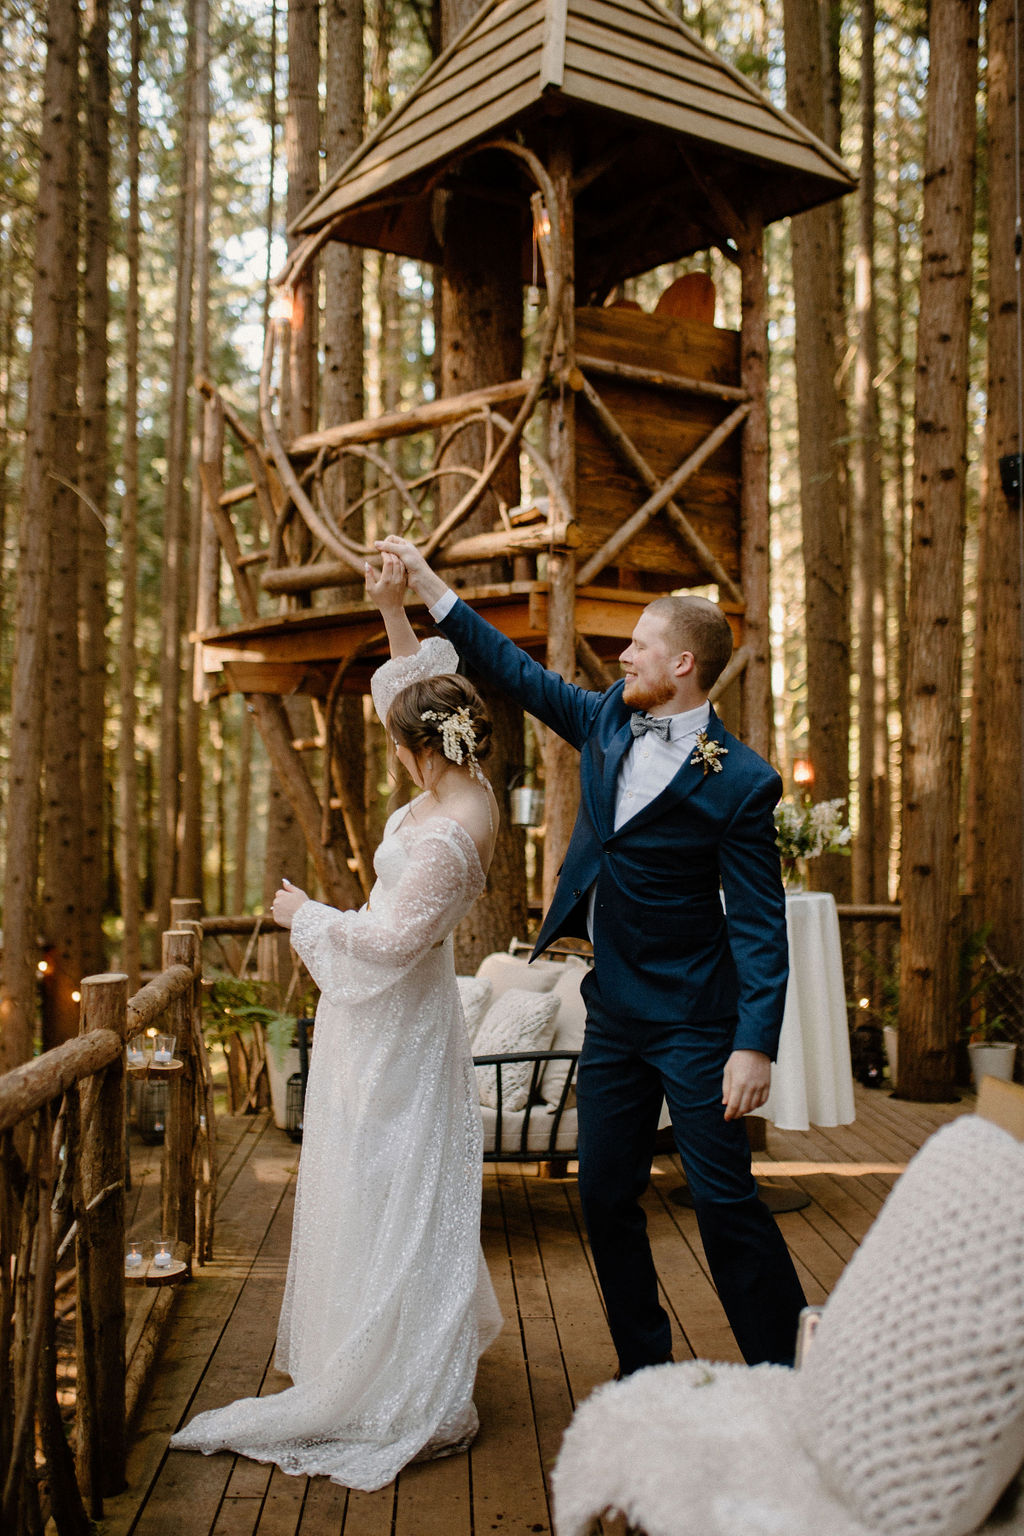 Outdoor Washington Elopement surrounded by forests and towering trees